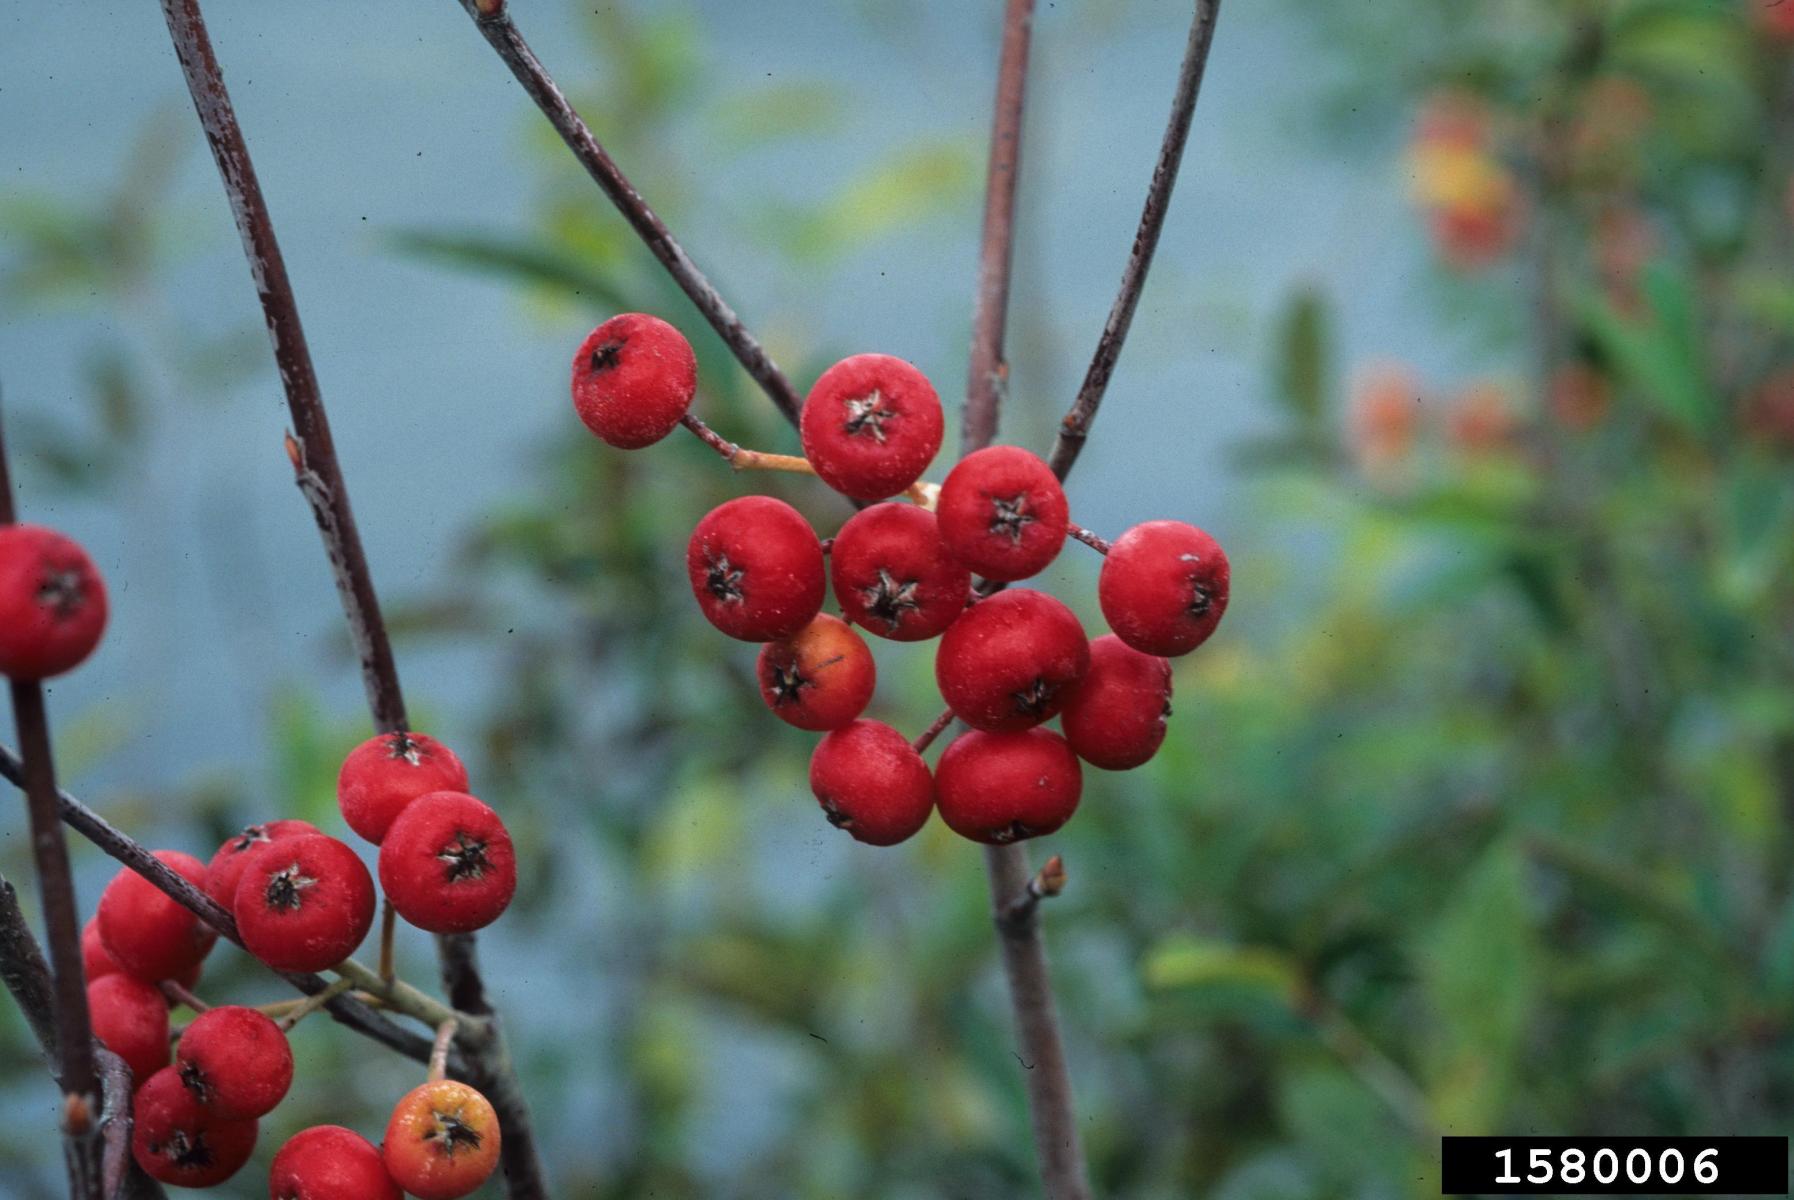 Photo of red chokeberry fruits below is courtesy creative commons license from John Ruter, University of Georgia, Bugwood.org